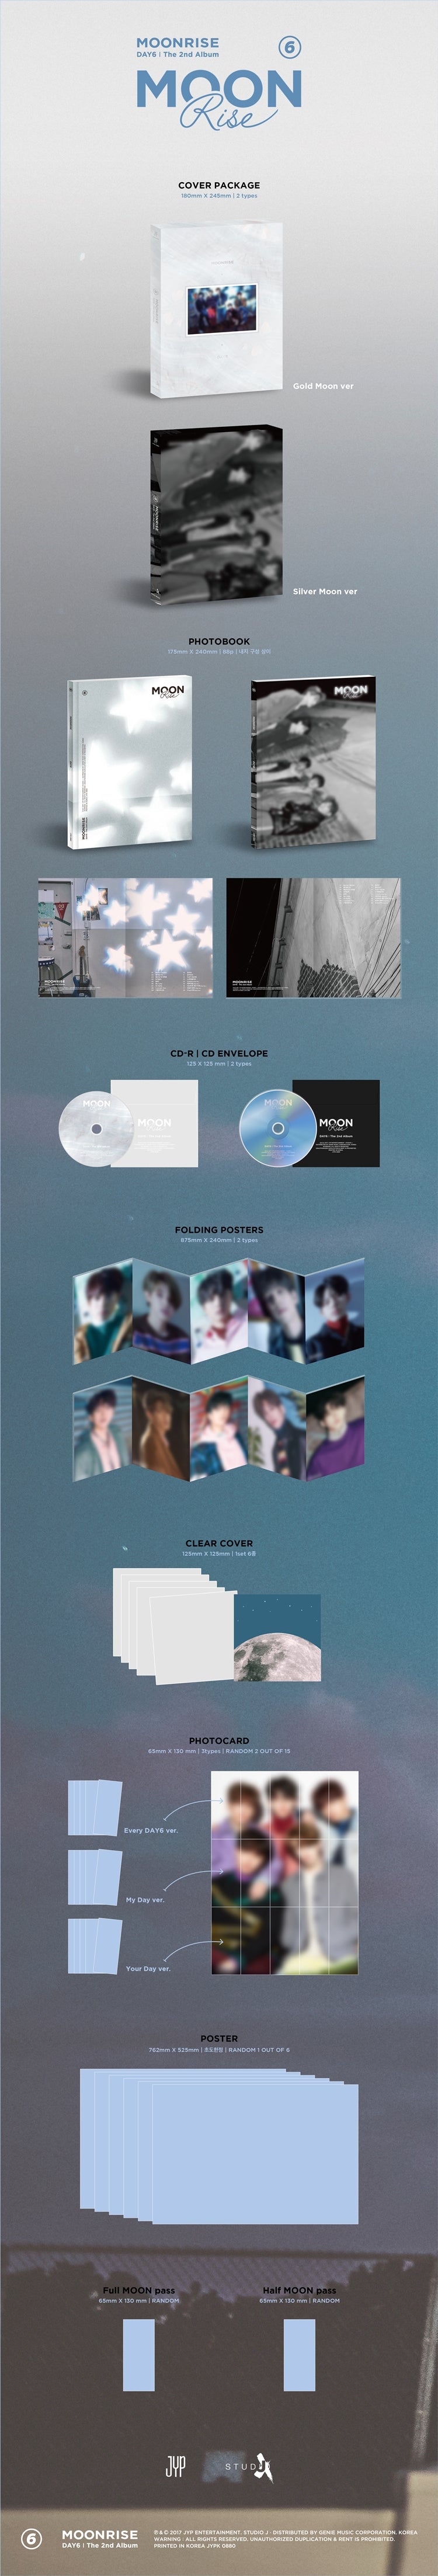 1 CD
1 Photo Book (88 pages)
1 Folding Poster
1 Clear Cover Set
2 Photo Cards